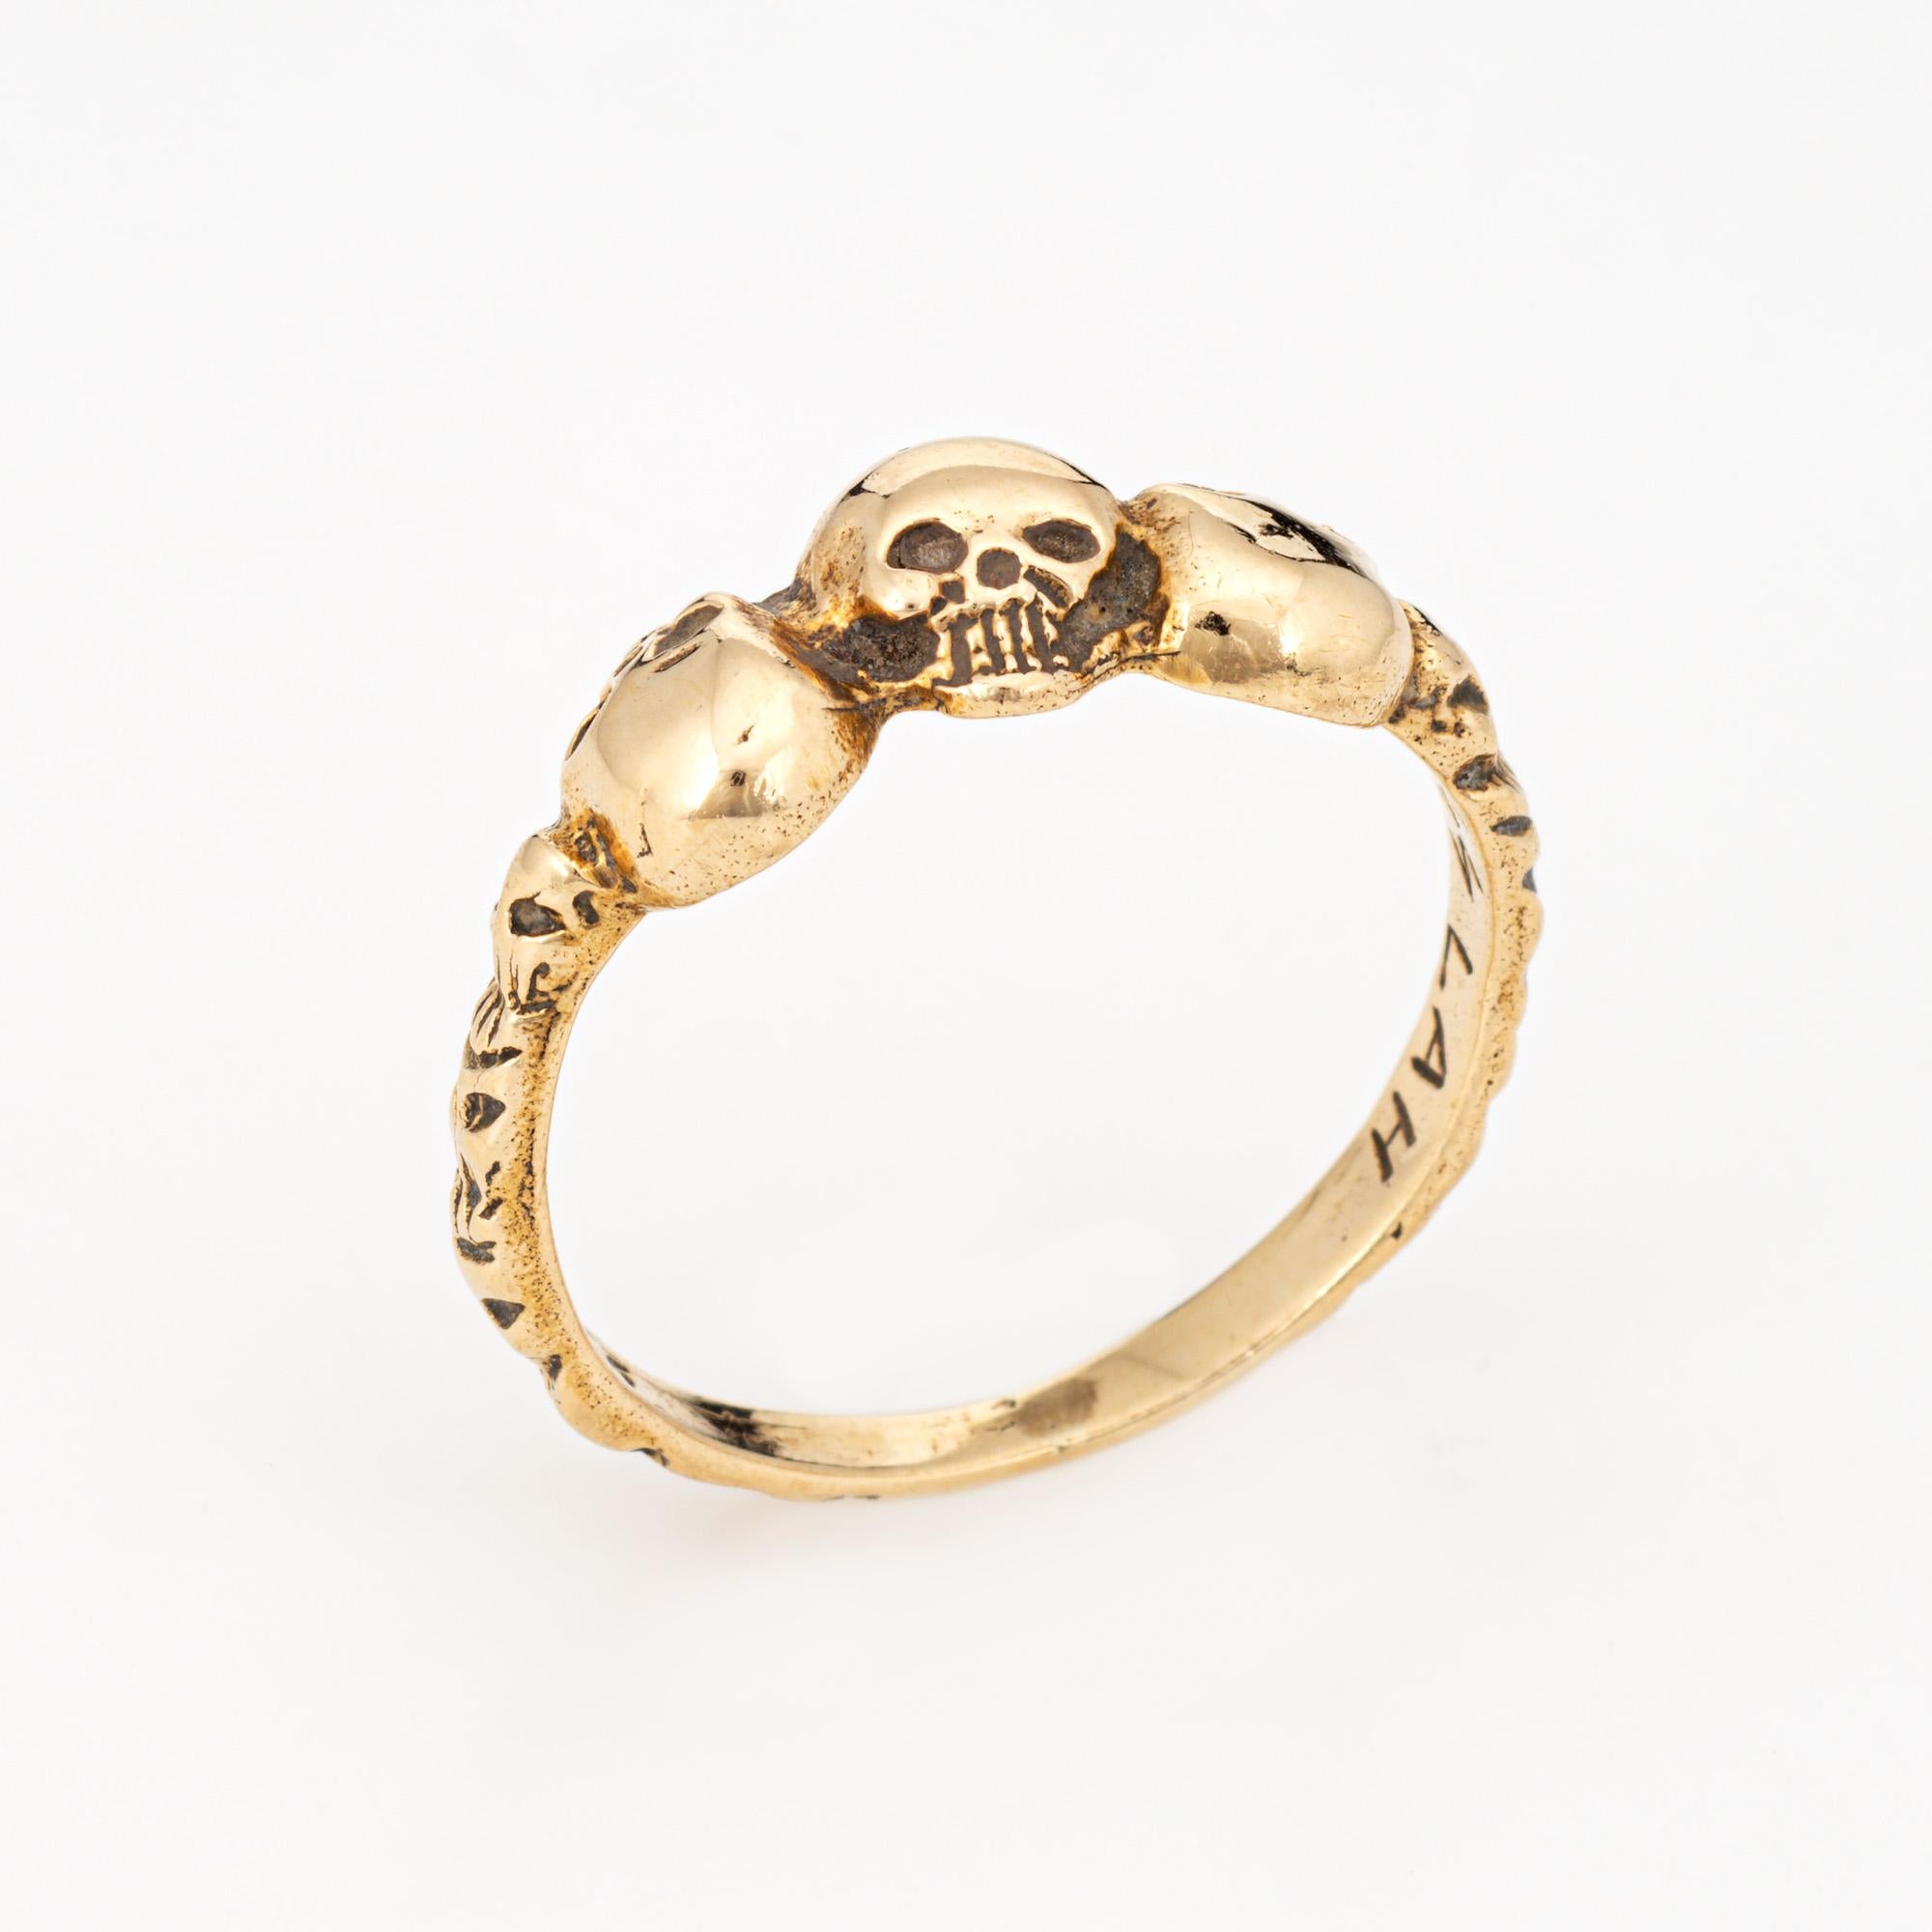 Stylish vintage skull ring crafted in 14 karat yellow gold. 

Three skull heads with the center set in opposing form adorn the band. The ring is great worn alone or stacked with your fine jewelry from any era.  

The ring is in very good condition.